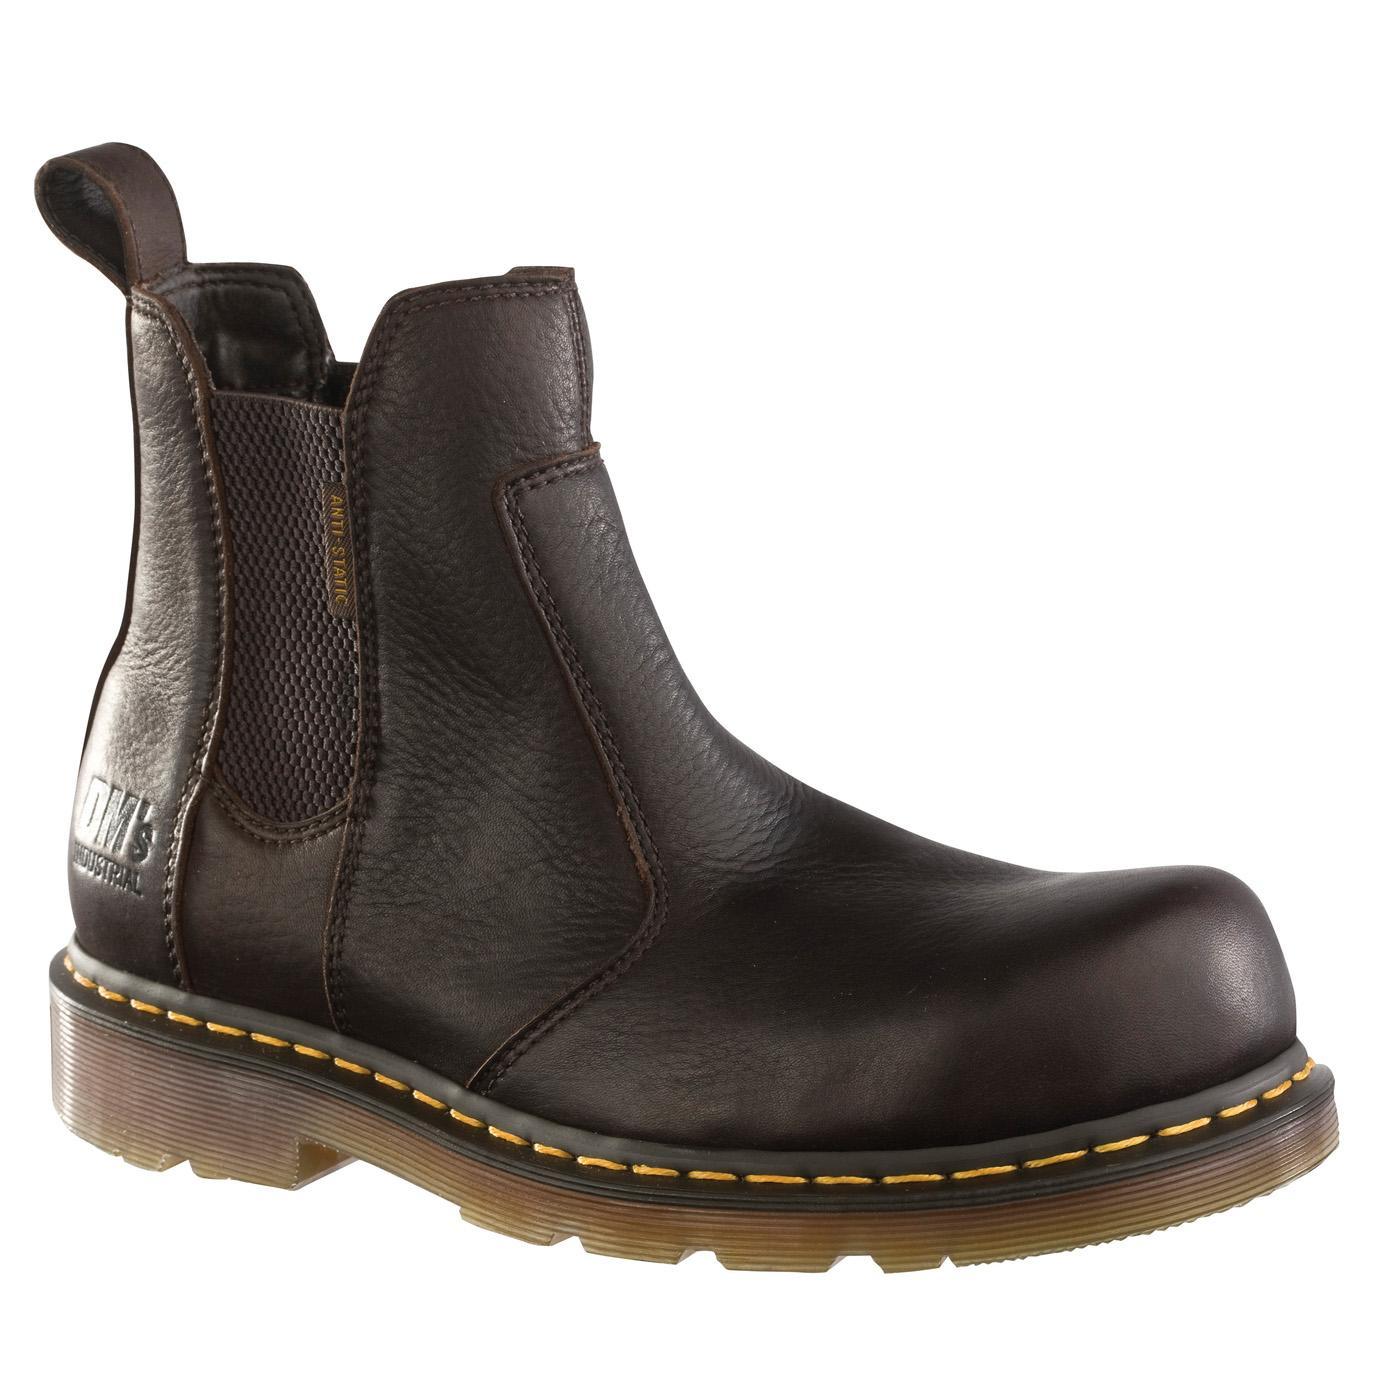 Dr. Martens Fusion Steel Toe SD Chelsea Work Boot, #13351201